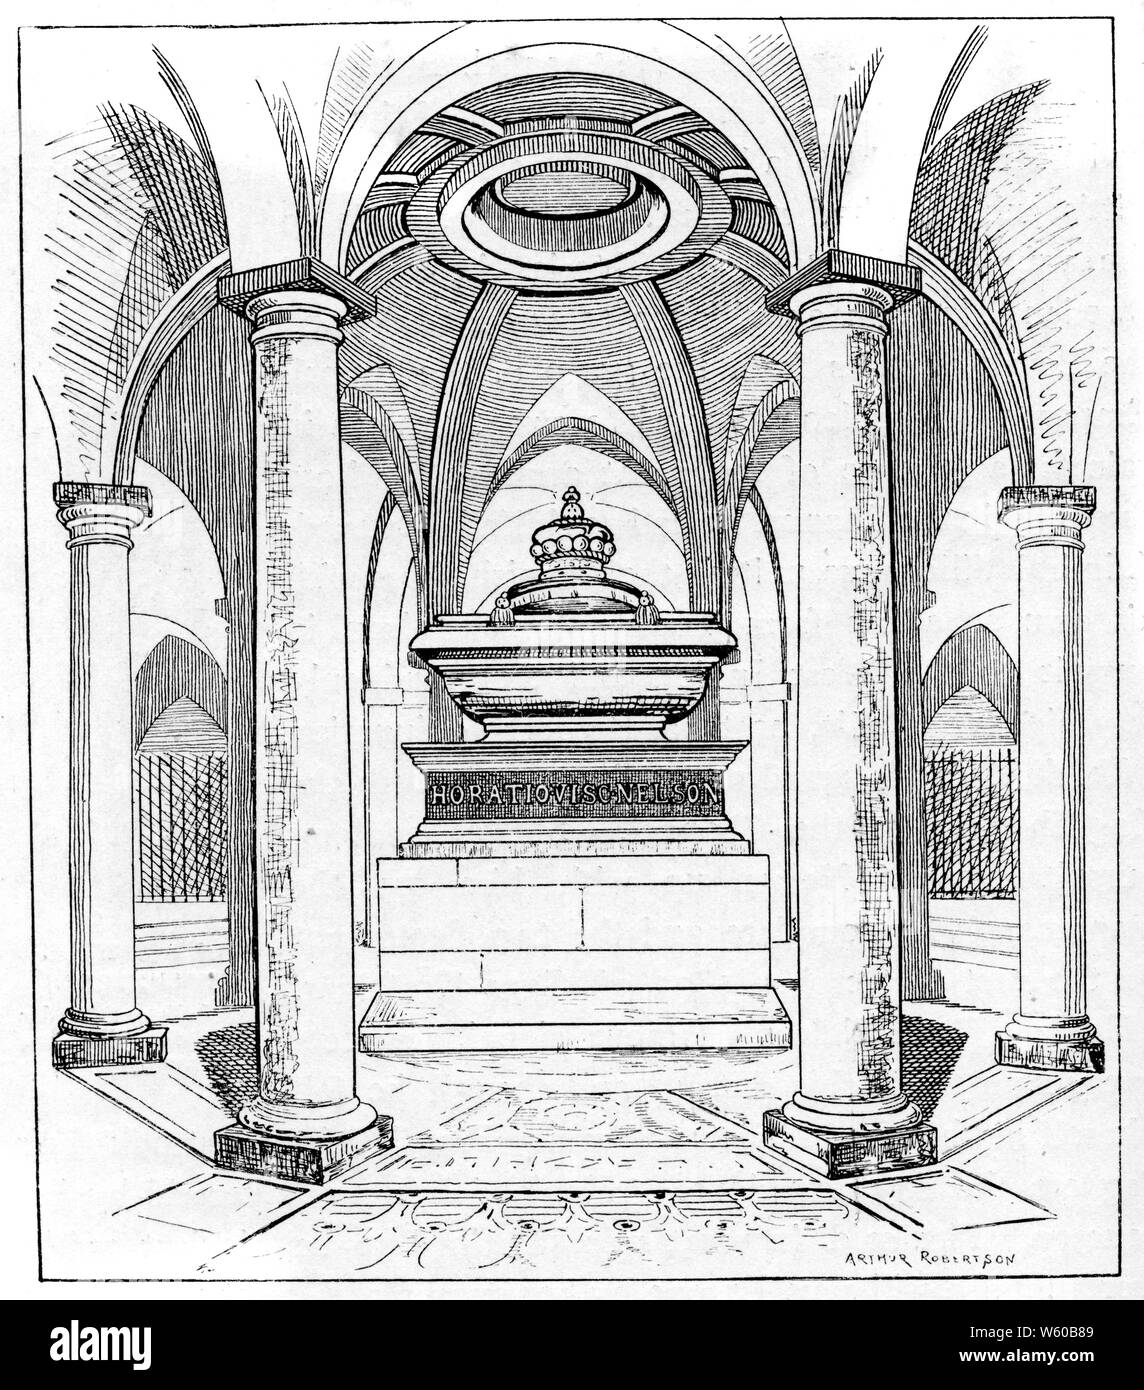 Nelson's monument, in the crypt of St Paul's Cathedral, London, 19th century. By Arthur Robertson. Lord Nelson was killed in the Battle of Trafalgar in 1805 and buried in St Paul's after a state funeral. He was laid to rest in a coffin made from the timber of a French ship he defeated in battle. The black marble sarcophagus that adorns his tomb was originally made for Cardinal Wolsey, Lord Chancellor but after Wolsey's fall from favour, it remained unused at Windsor until a suitable recipient could be found. Nelson's viscount coronet now tops the sarcophagus. Stock Photo